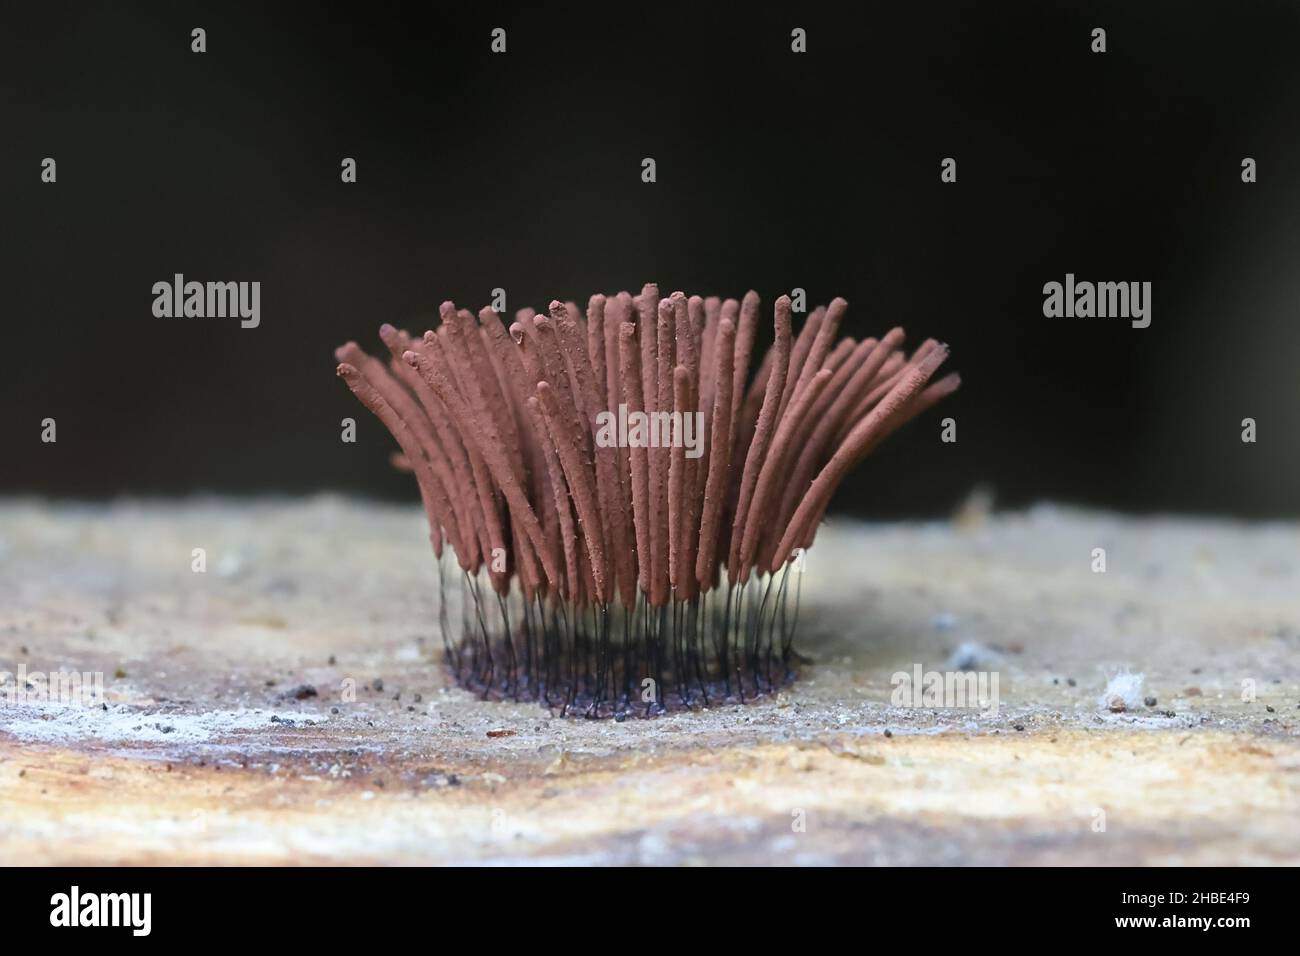 Stemonitis lignicola, known as the chocolate tube slime mold or mould Stock Photo